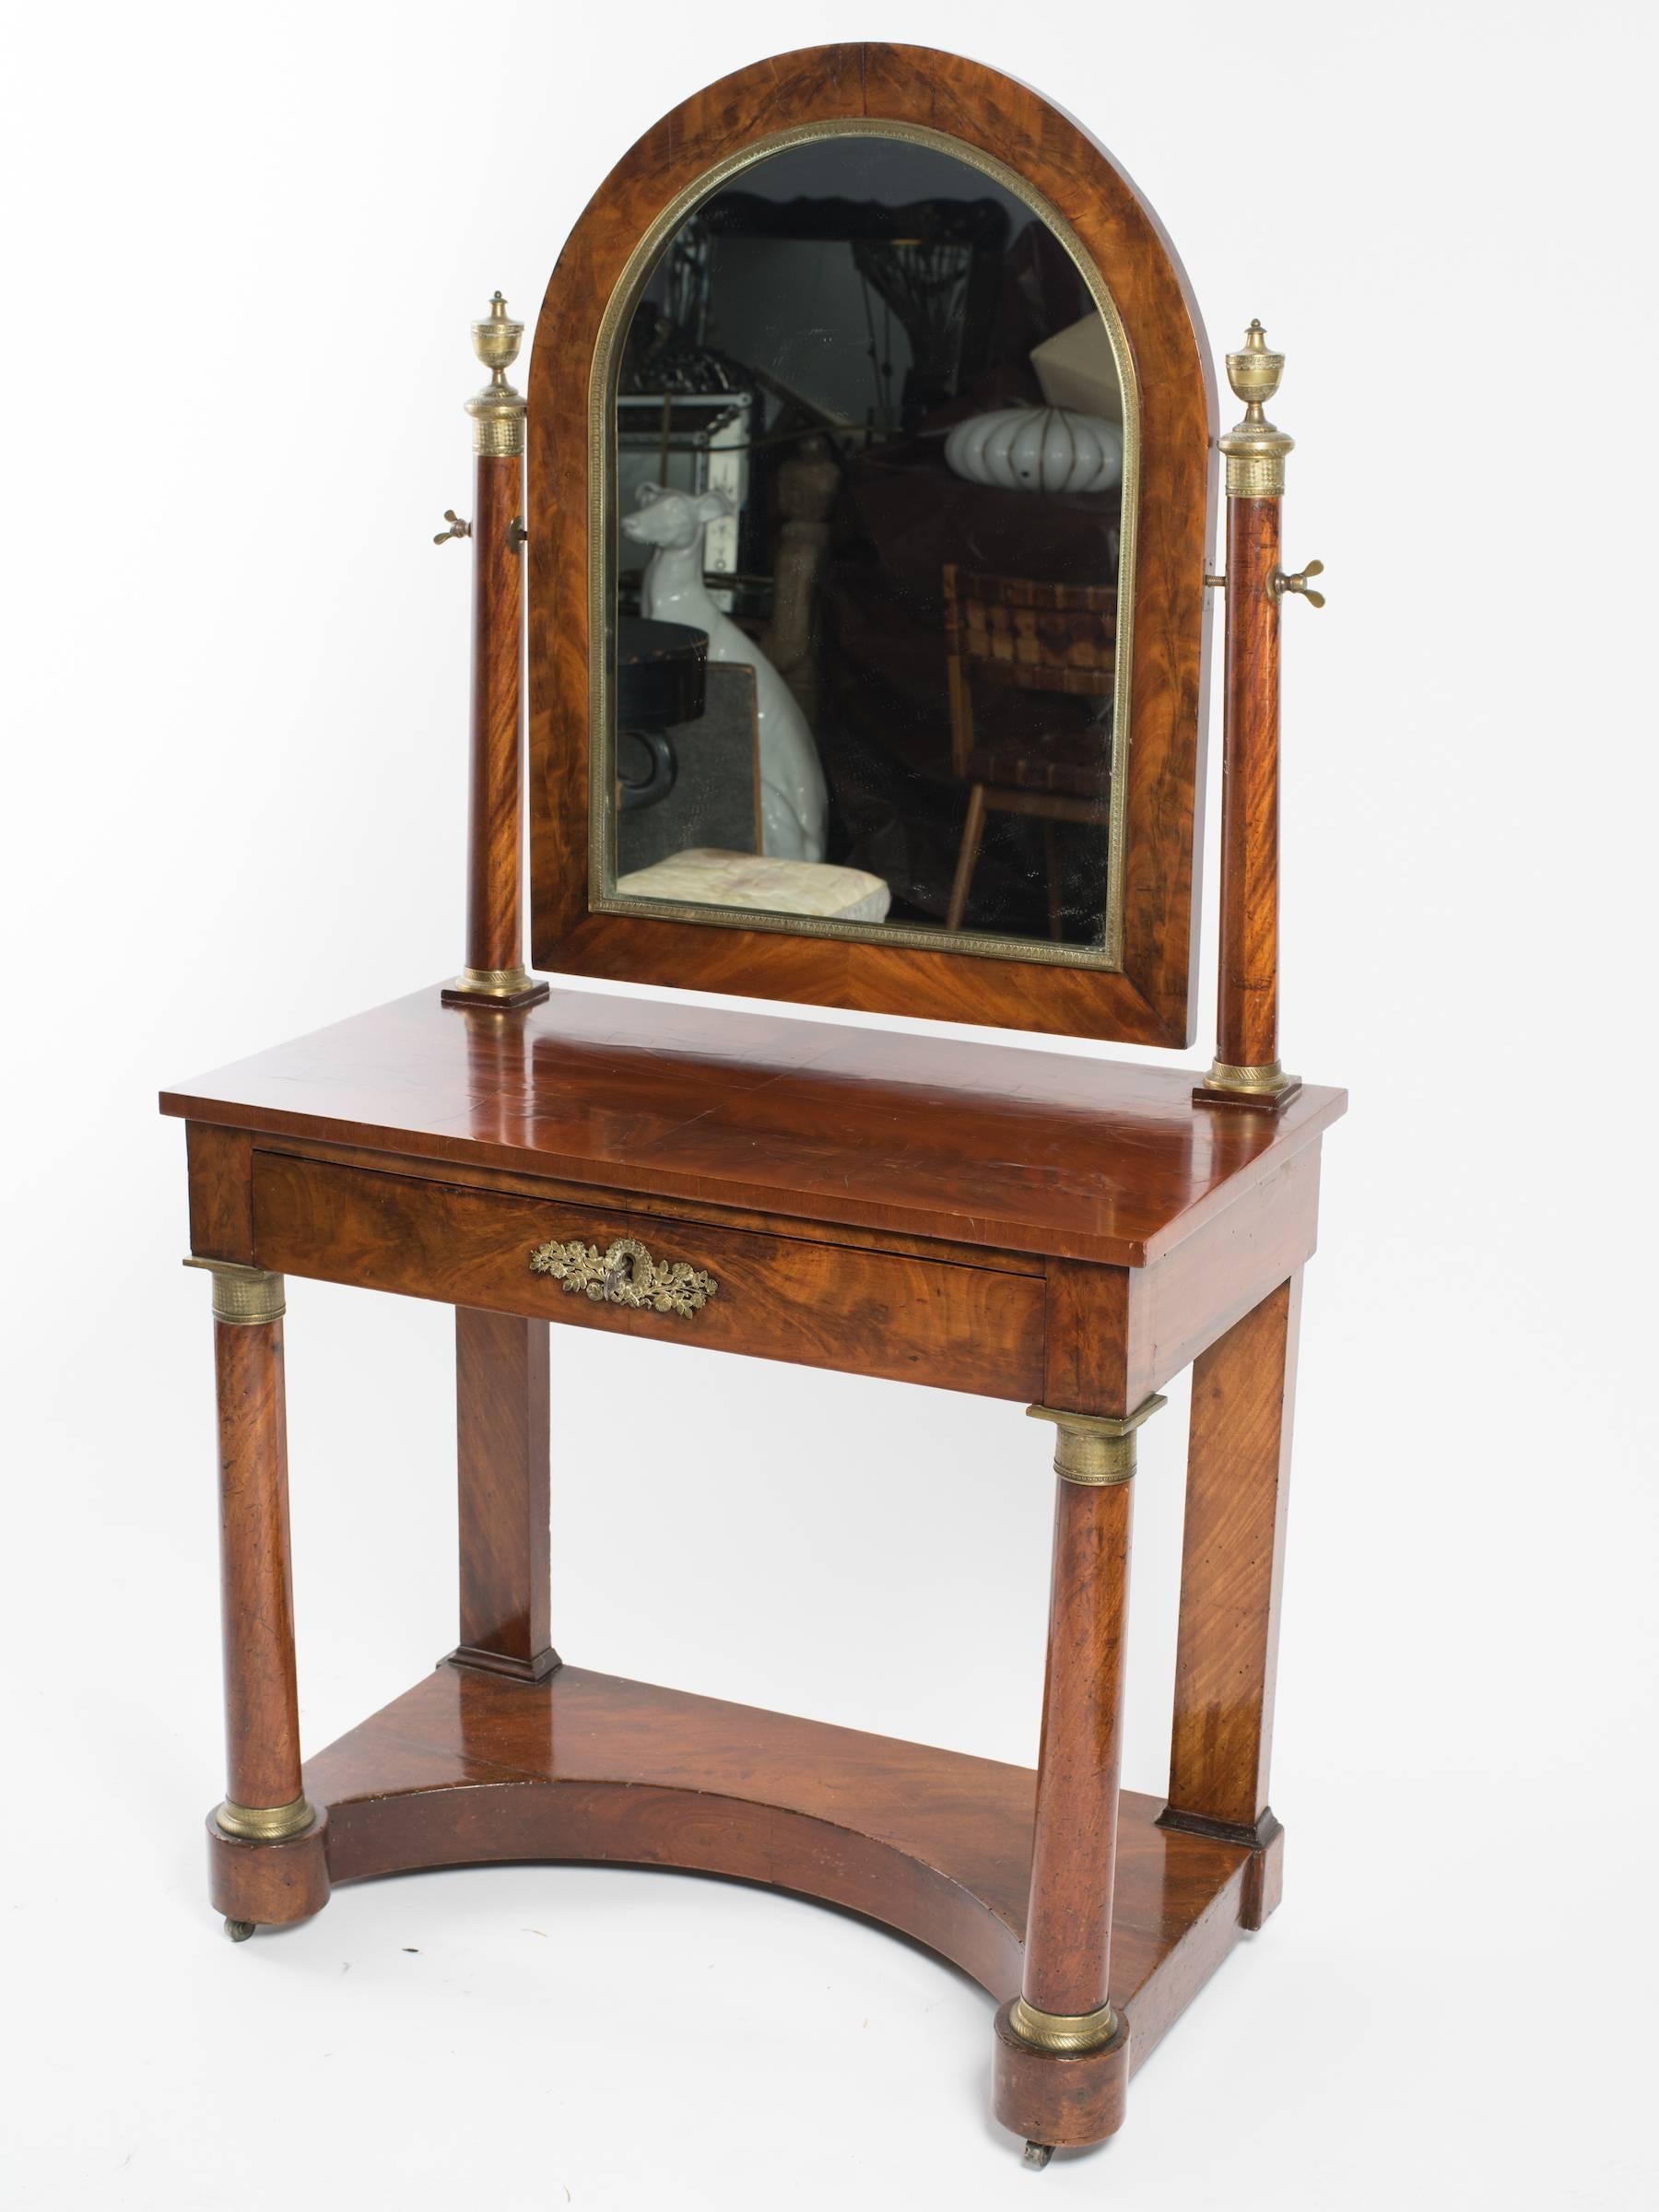 19th century Empire dressing table and mirror. Still has the receipt from the 1980s that says it was bought for $ 5300.00.